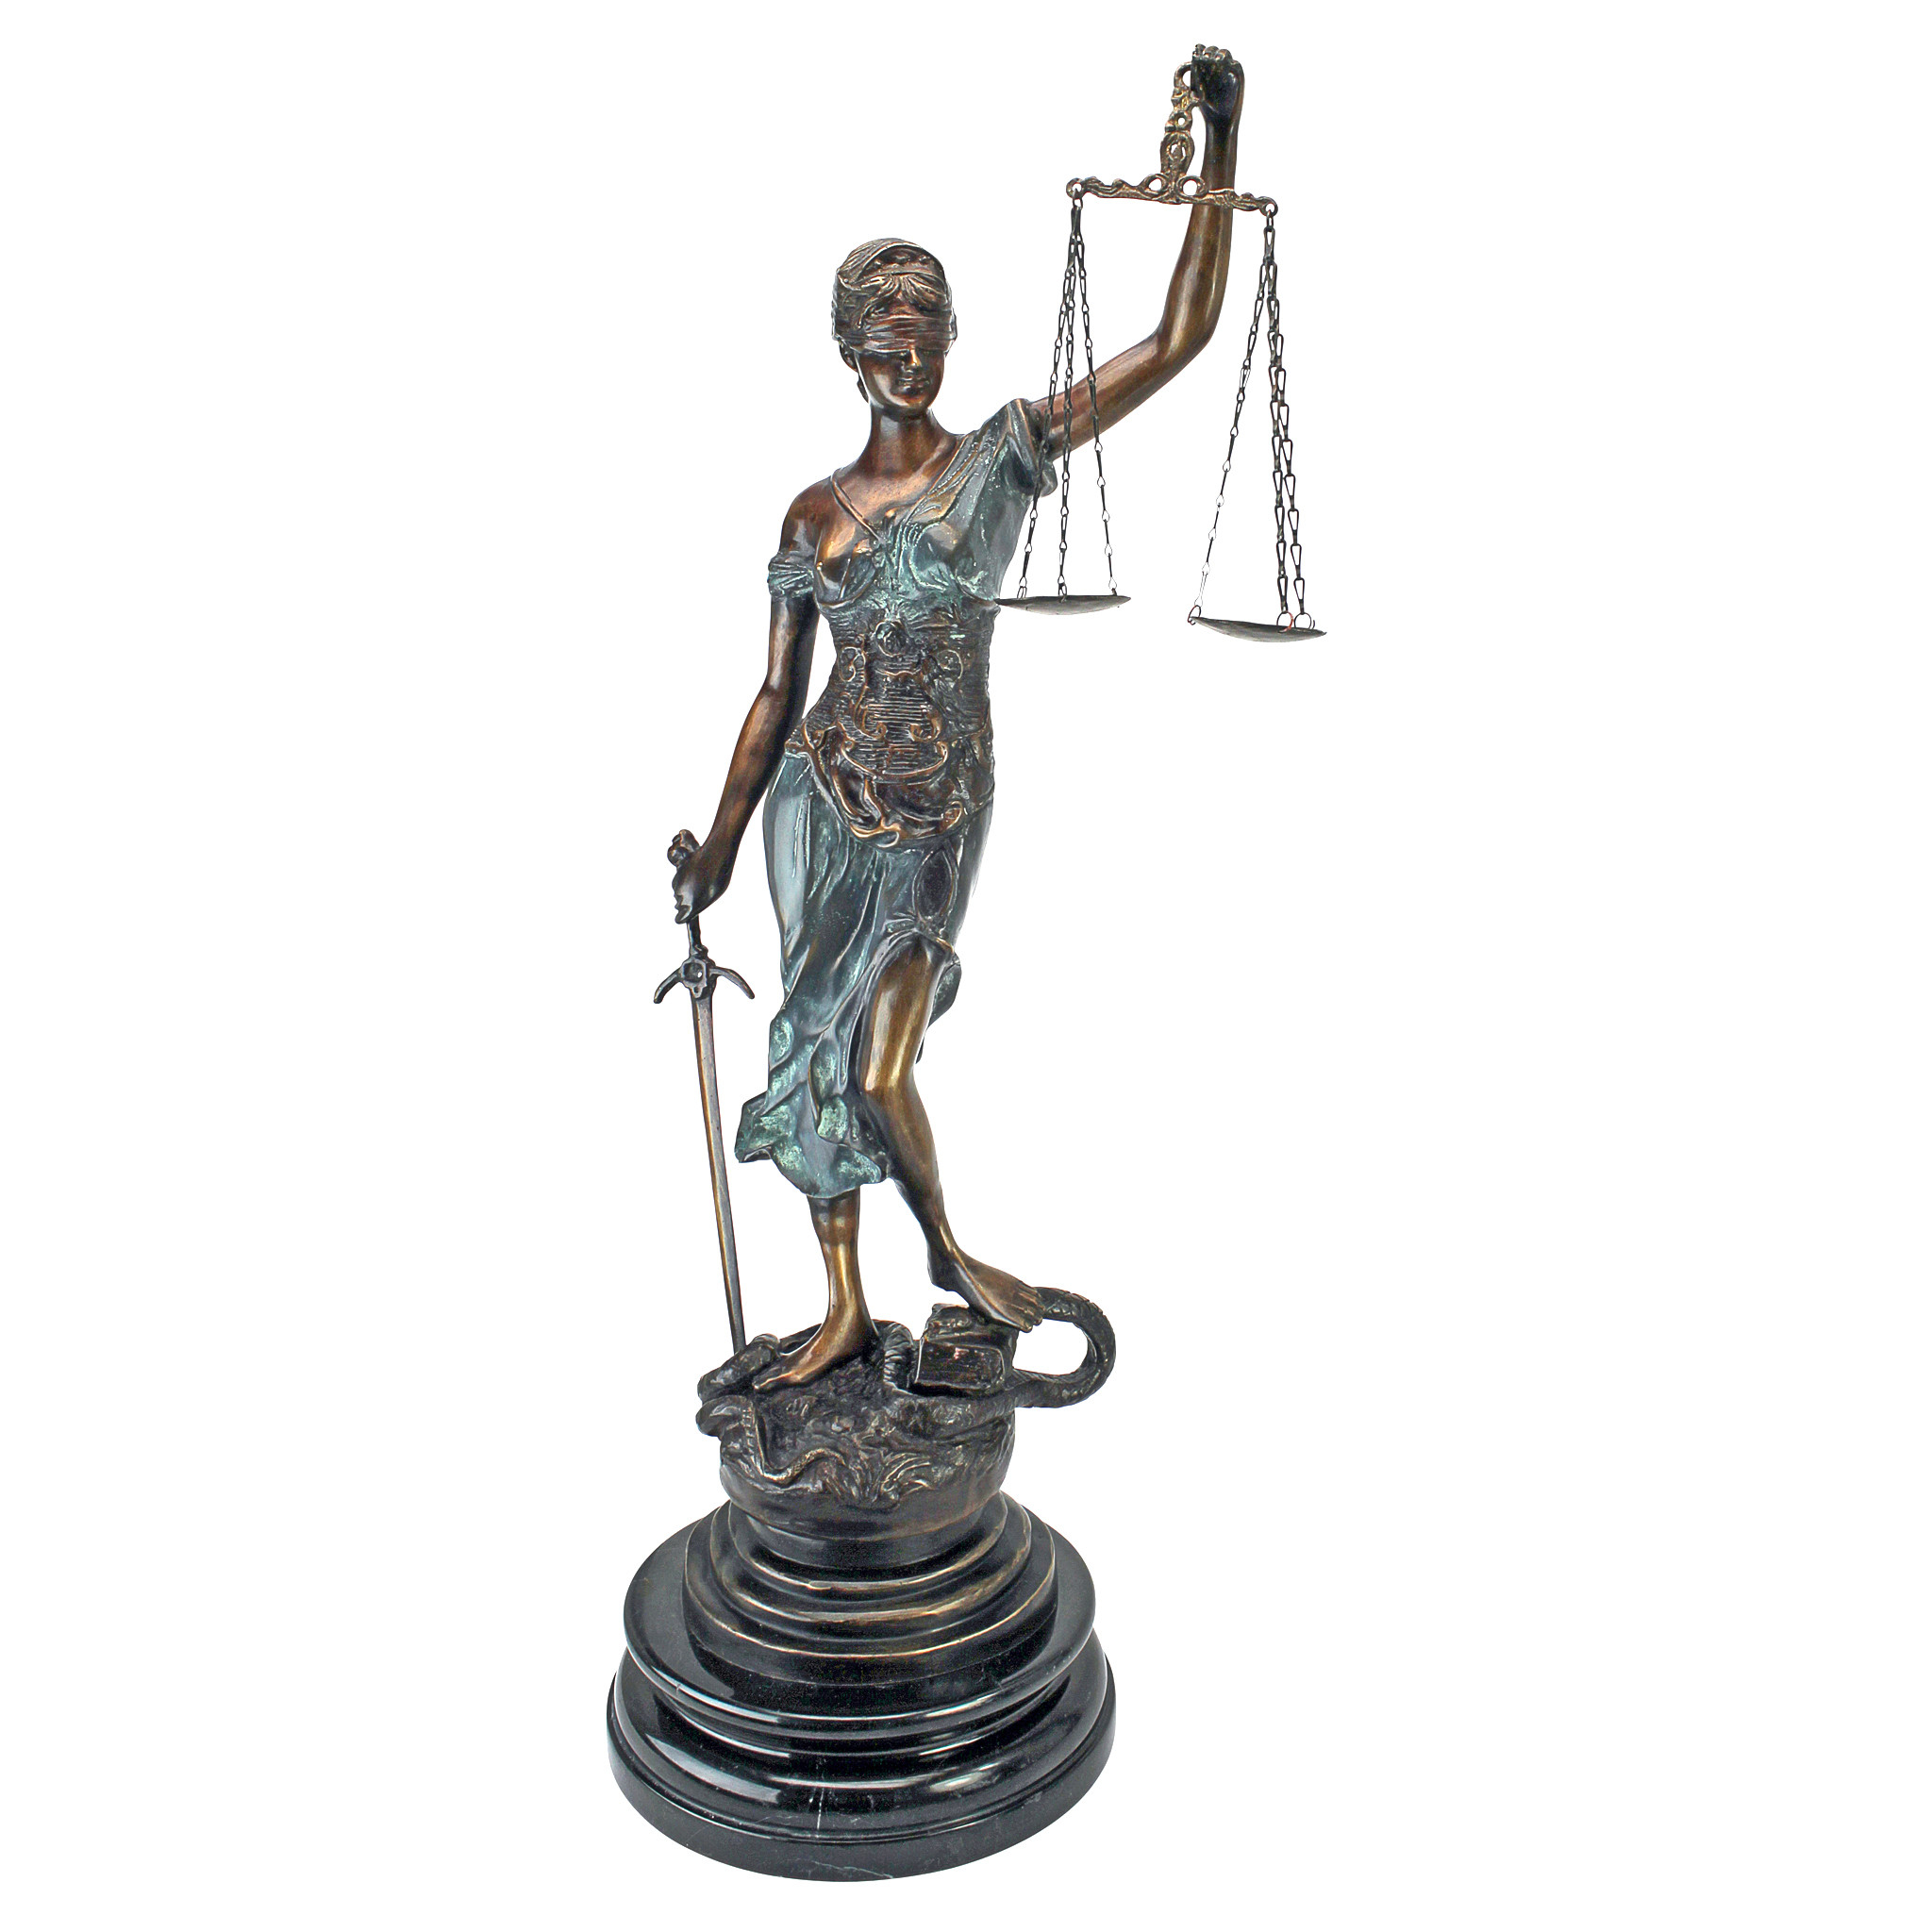 blind lady justice statue